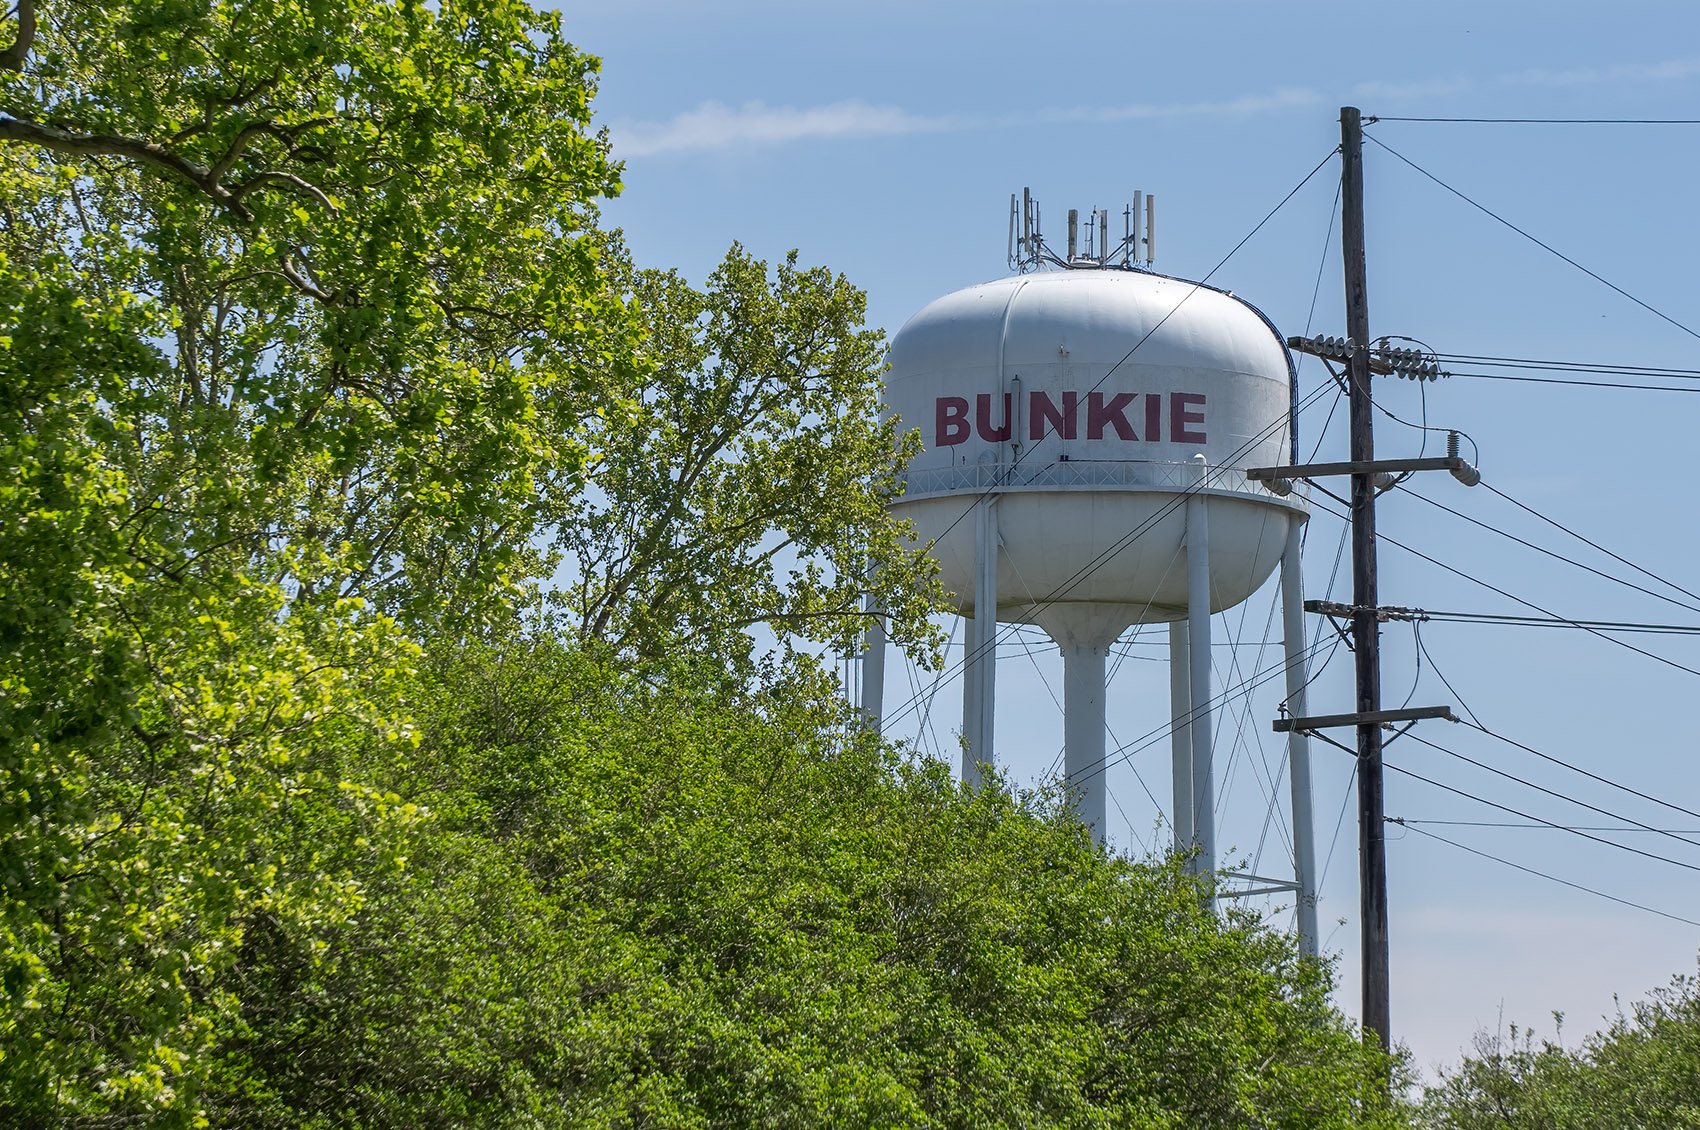 white bunkie louisiana water tower and trees with blue sky